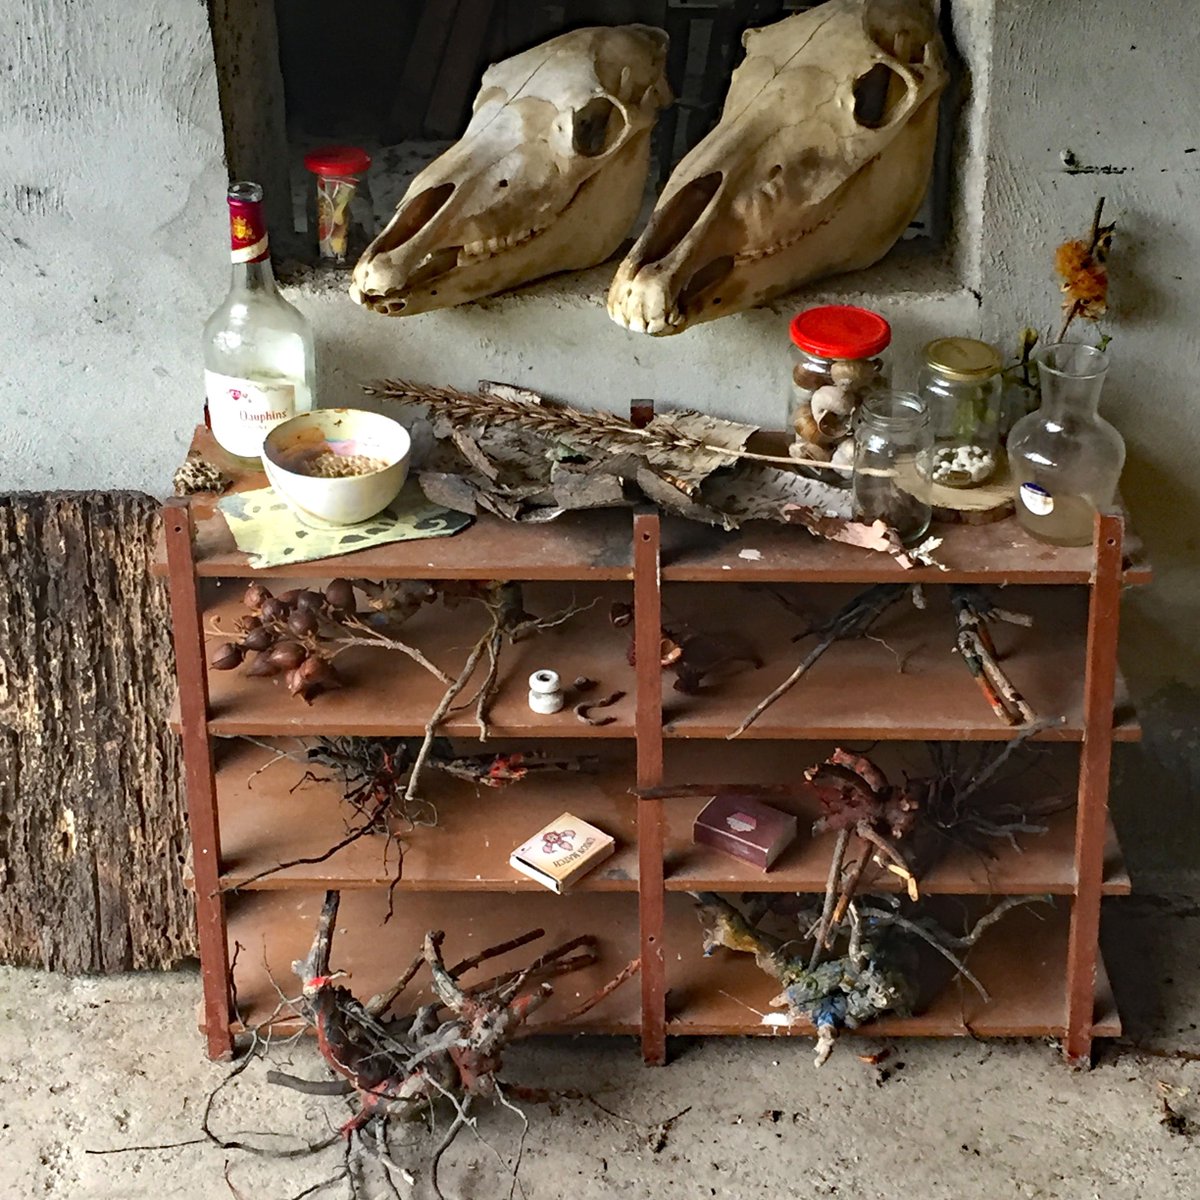 I had an artist friend Saskia Lubbber stay at my place for a few weeks..

she made this beautiful #rariteitenkabinet #mini #MuseumOfNaturalHistory #MementoMori from stuff she found around the house and on the land..

Don't have a TV, but can look for hours at this!